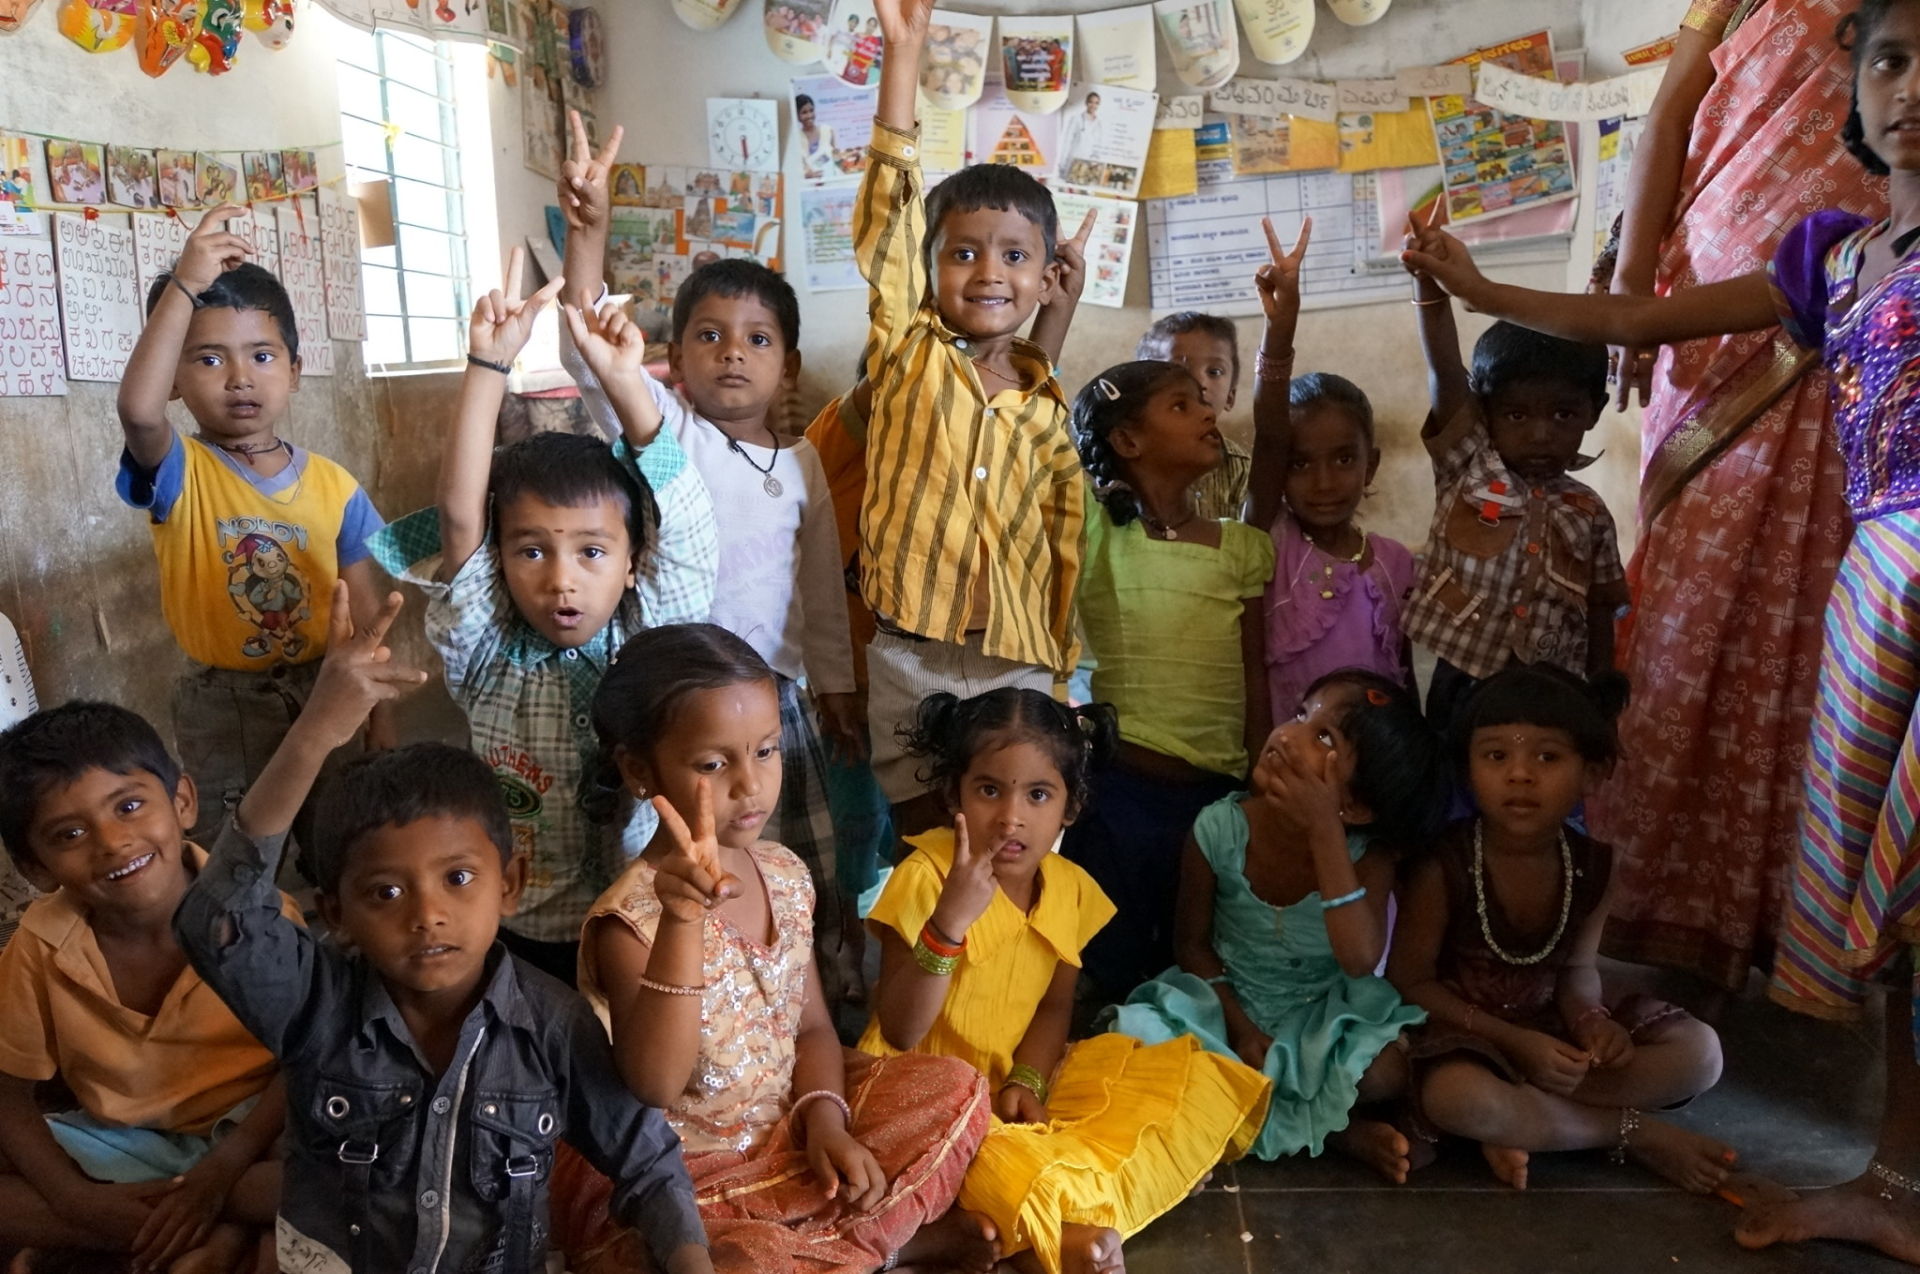 These extremely poor children come to this orphanage school about 45 minutes outside of Bangalore where they receive minimal education and maybe one small meal a day. We were able to give them food and jamkanas (blankets) to sleep on for nap time as oppose to the dirt floor of their school.